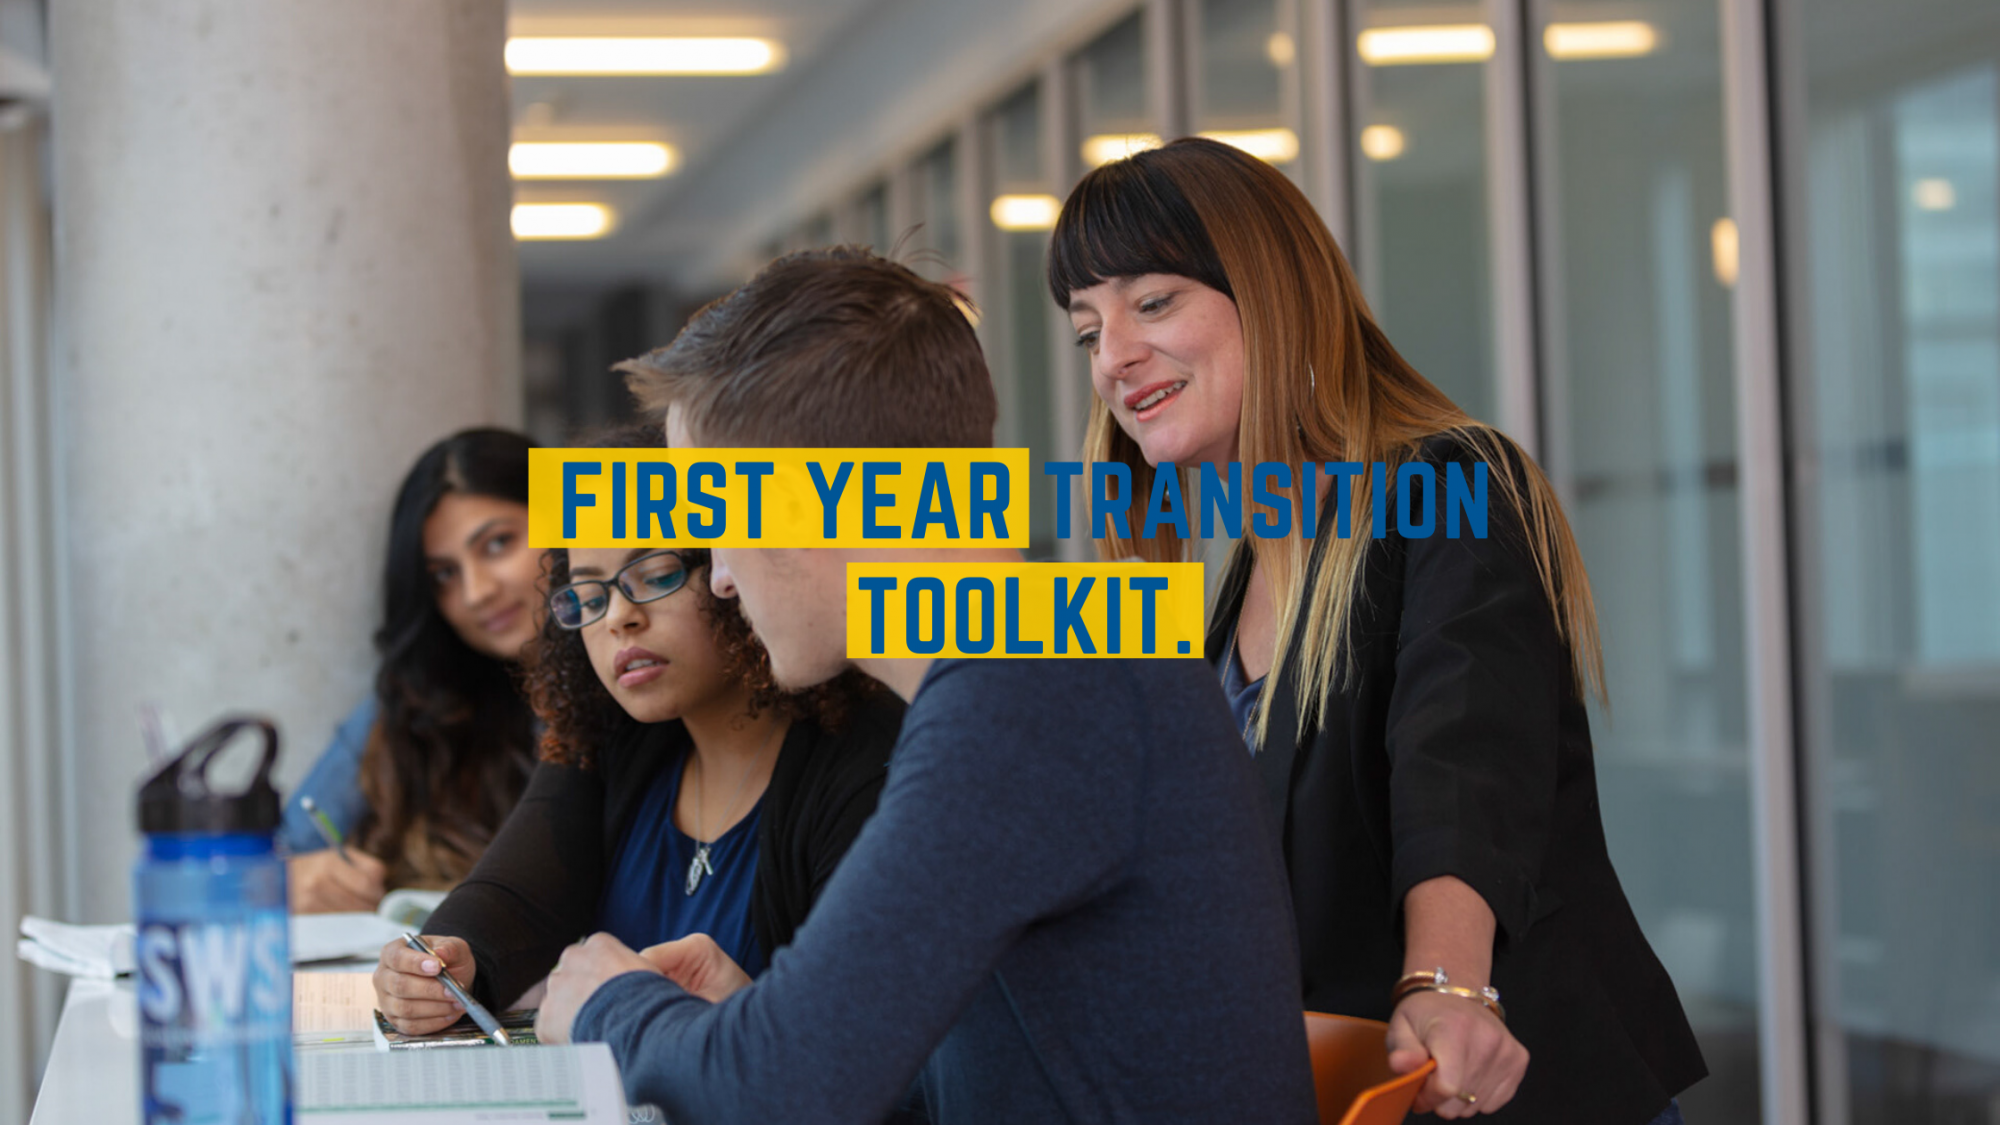 Link to the First Year Transition Toolkit website